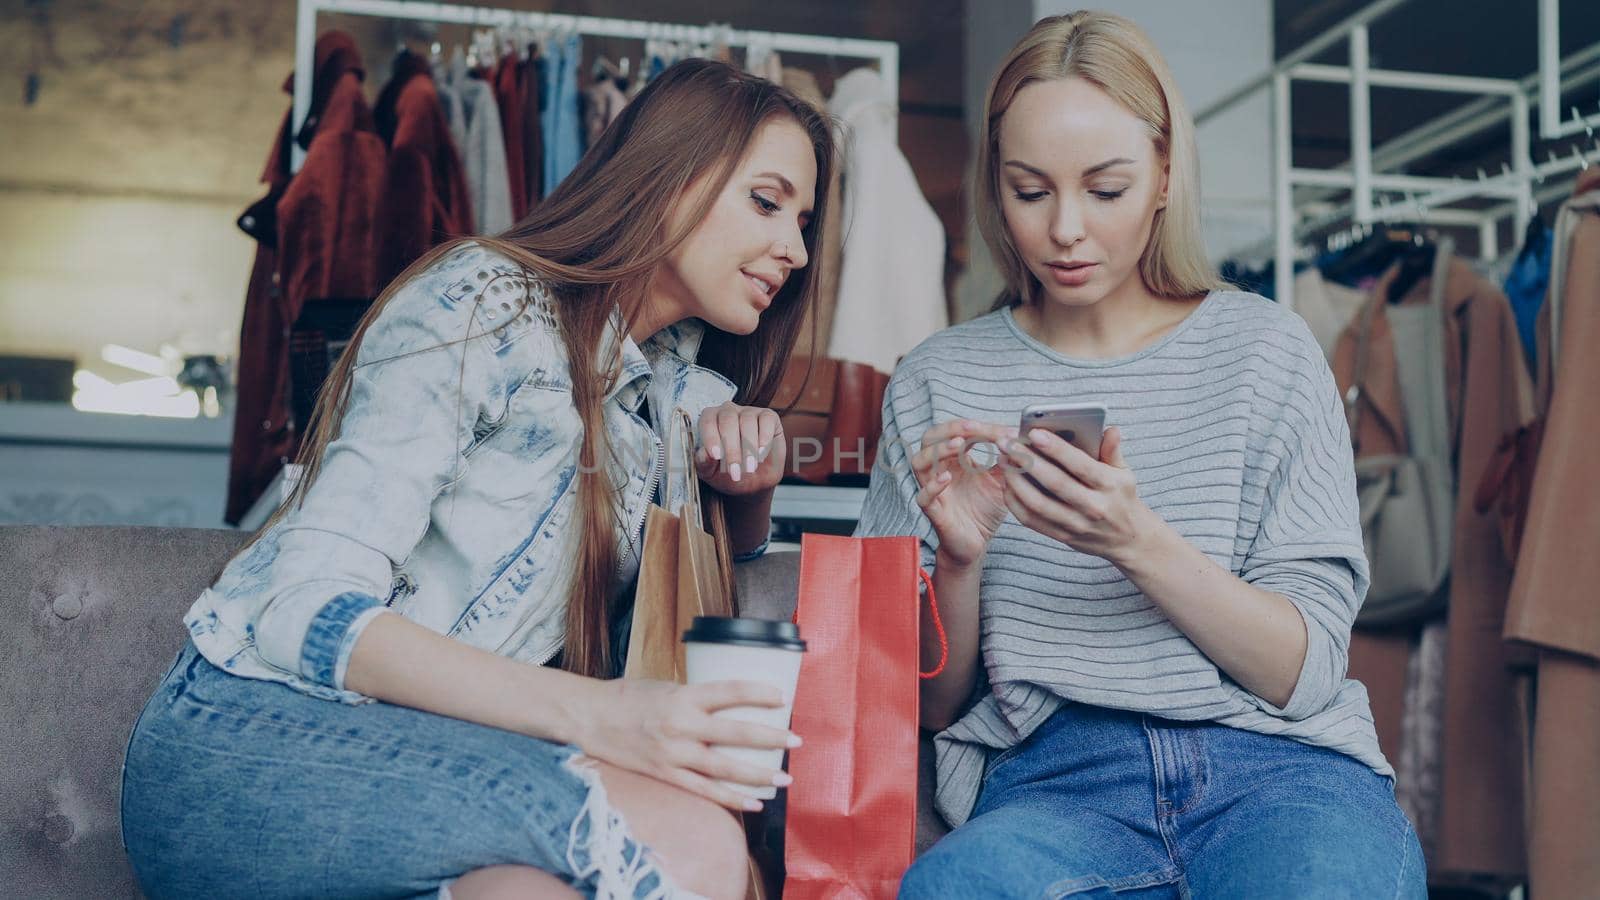 Cheerful young women chatting and using modern smartphone while sitting in nice clothing boutique. They are smiling and gesturing enthusiastically. by silverkblack